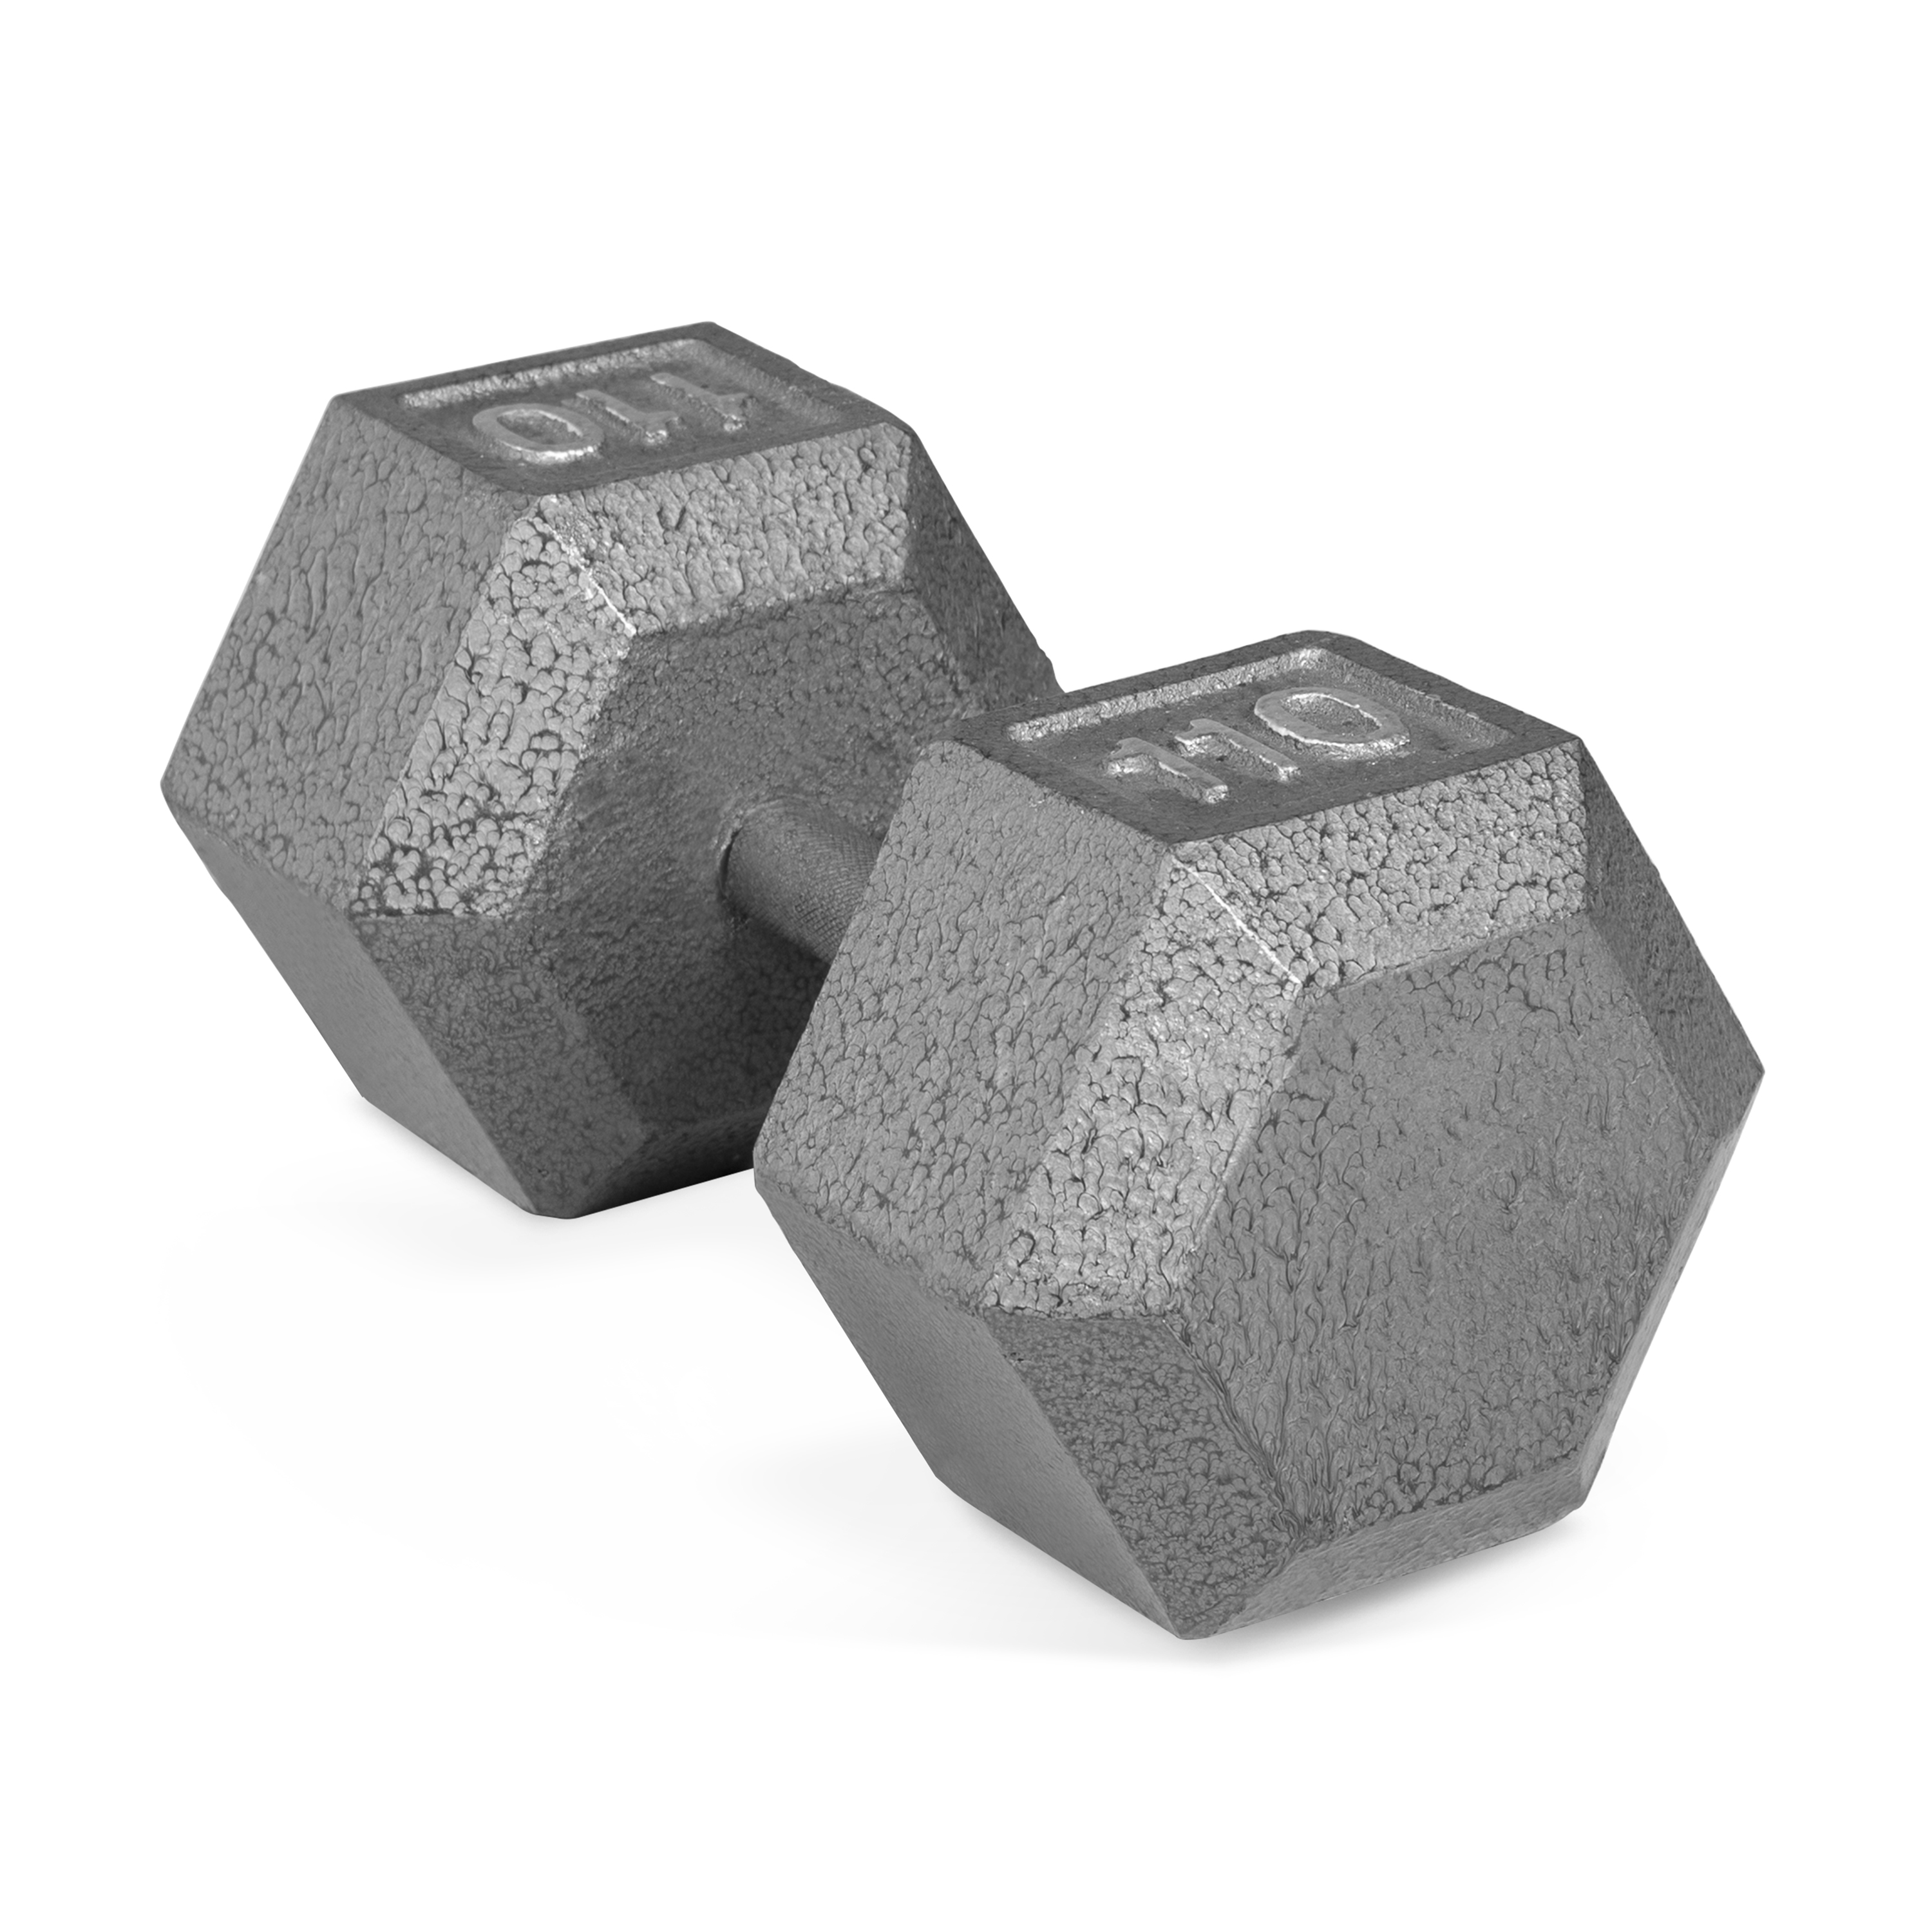 CAP Barbell 110lb Cast Iron Hex Dumbbell, Single - image 1 of 6